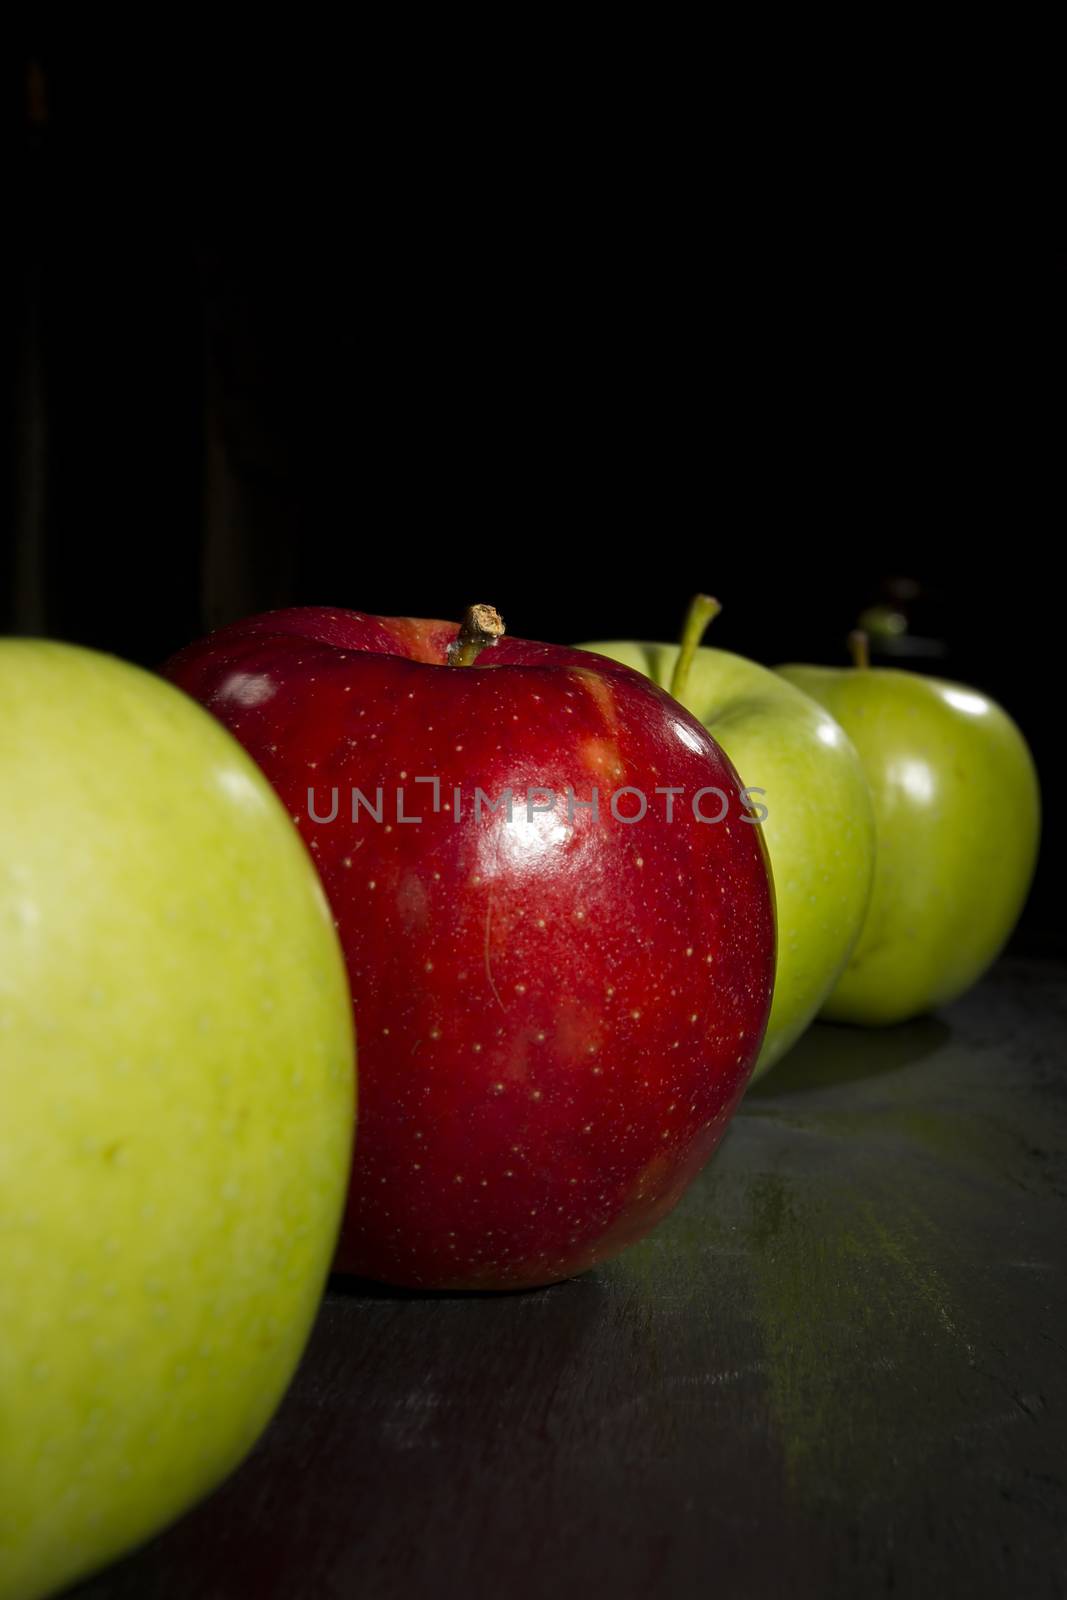 Red apple standing out in a row of green apples